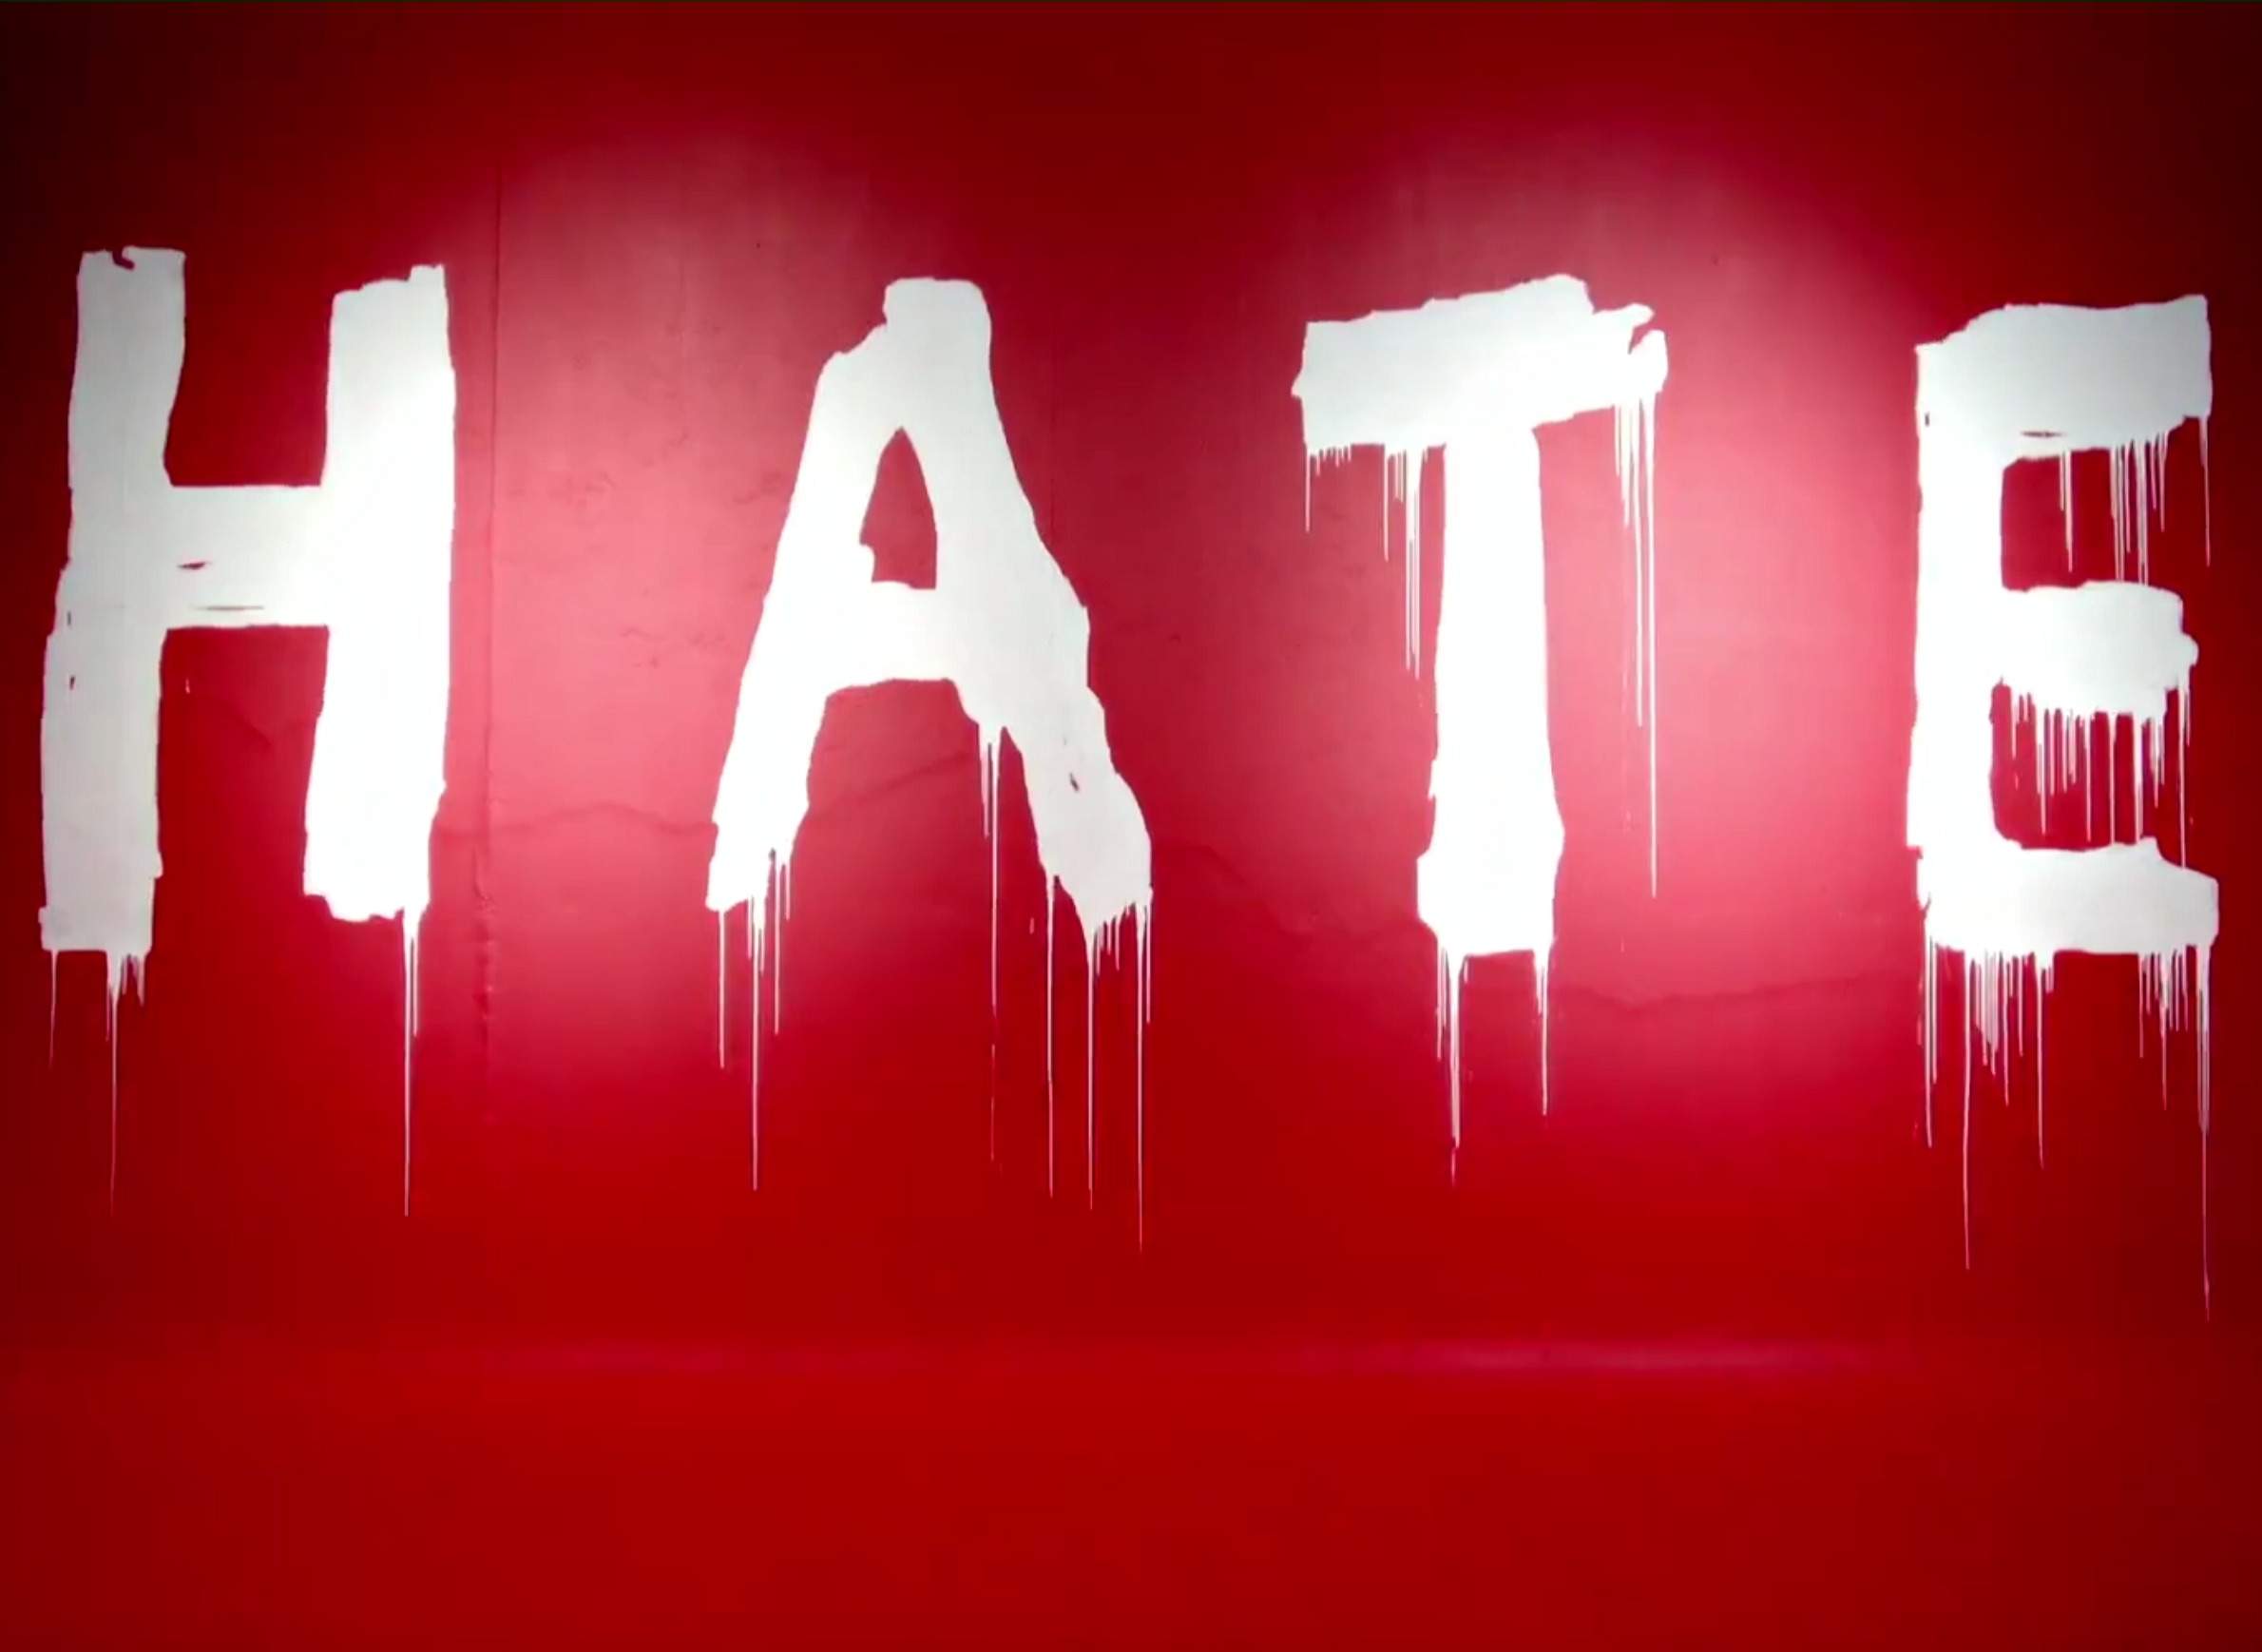 The word "hate" as graffiti